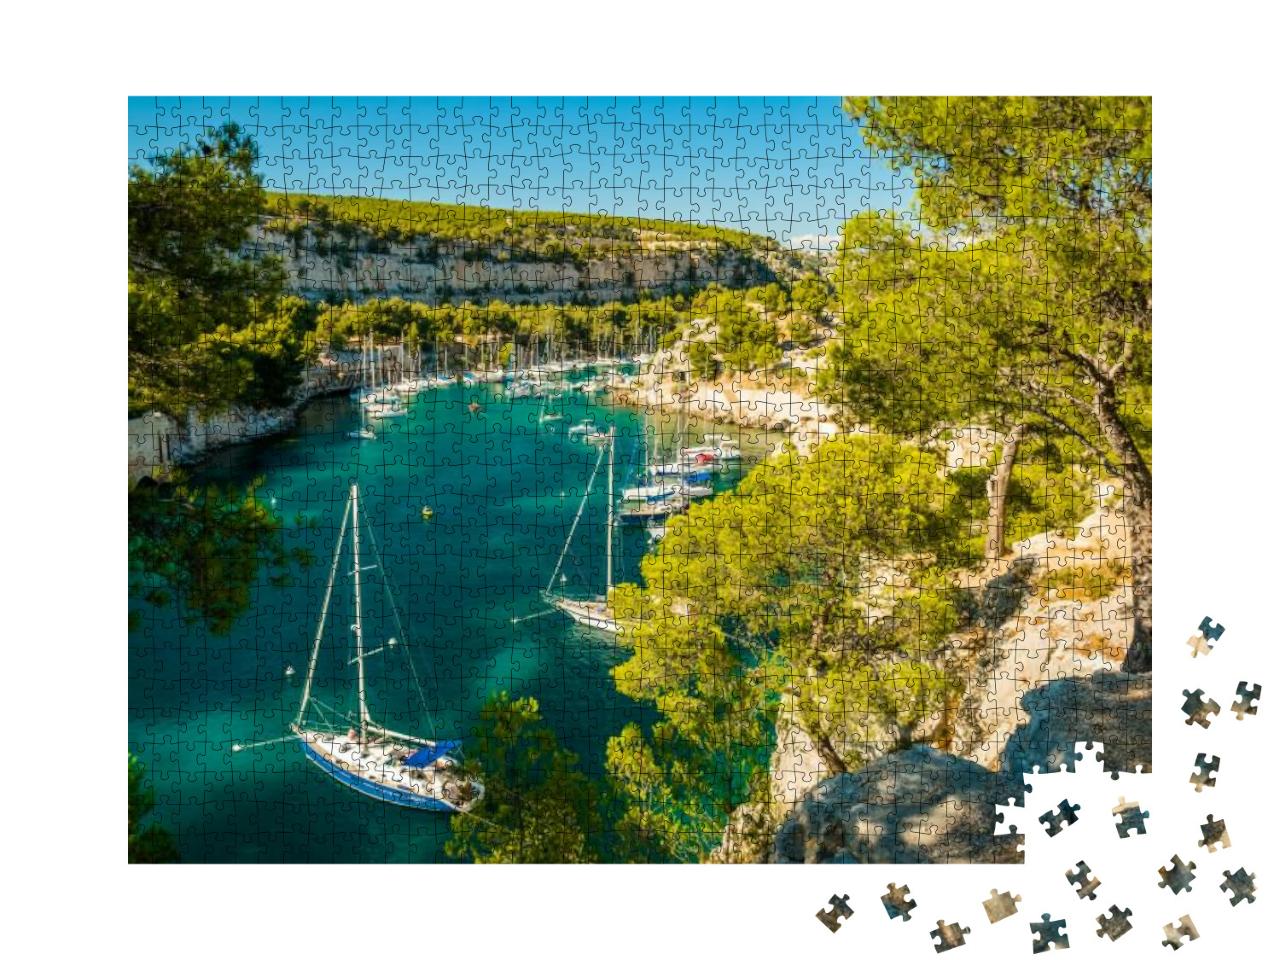 Calanque De Port Miou - Fjord Near Cassis Village in Prov... Jigsaw Puzzle with 1000 pieces